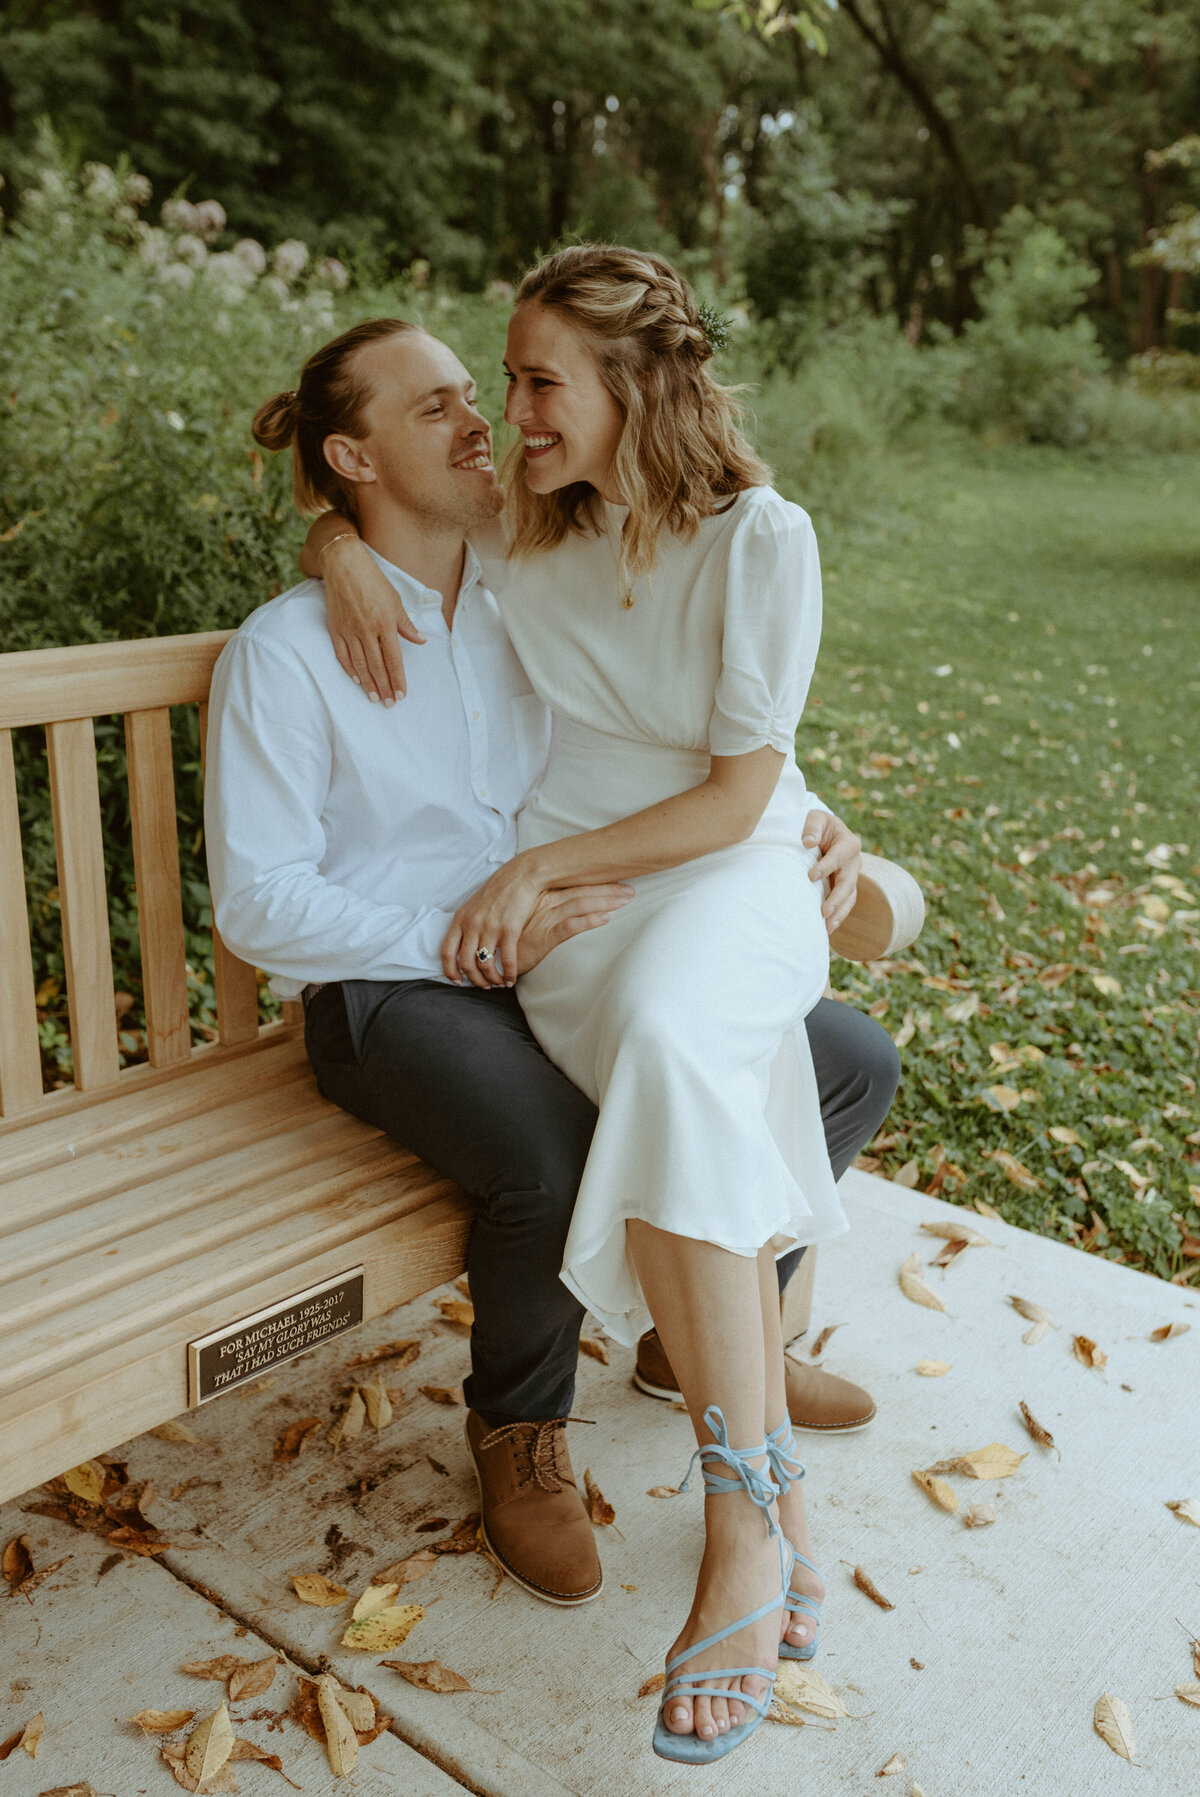 JustJessPhotography_Indianapolis Photographer_Brittany&Hank Holliday Park elopement88